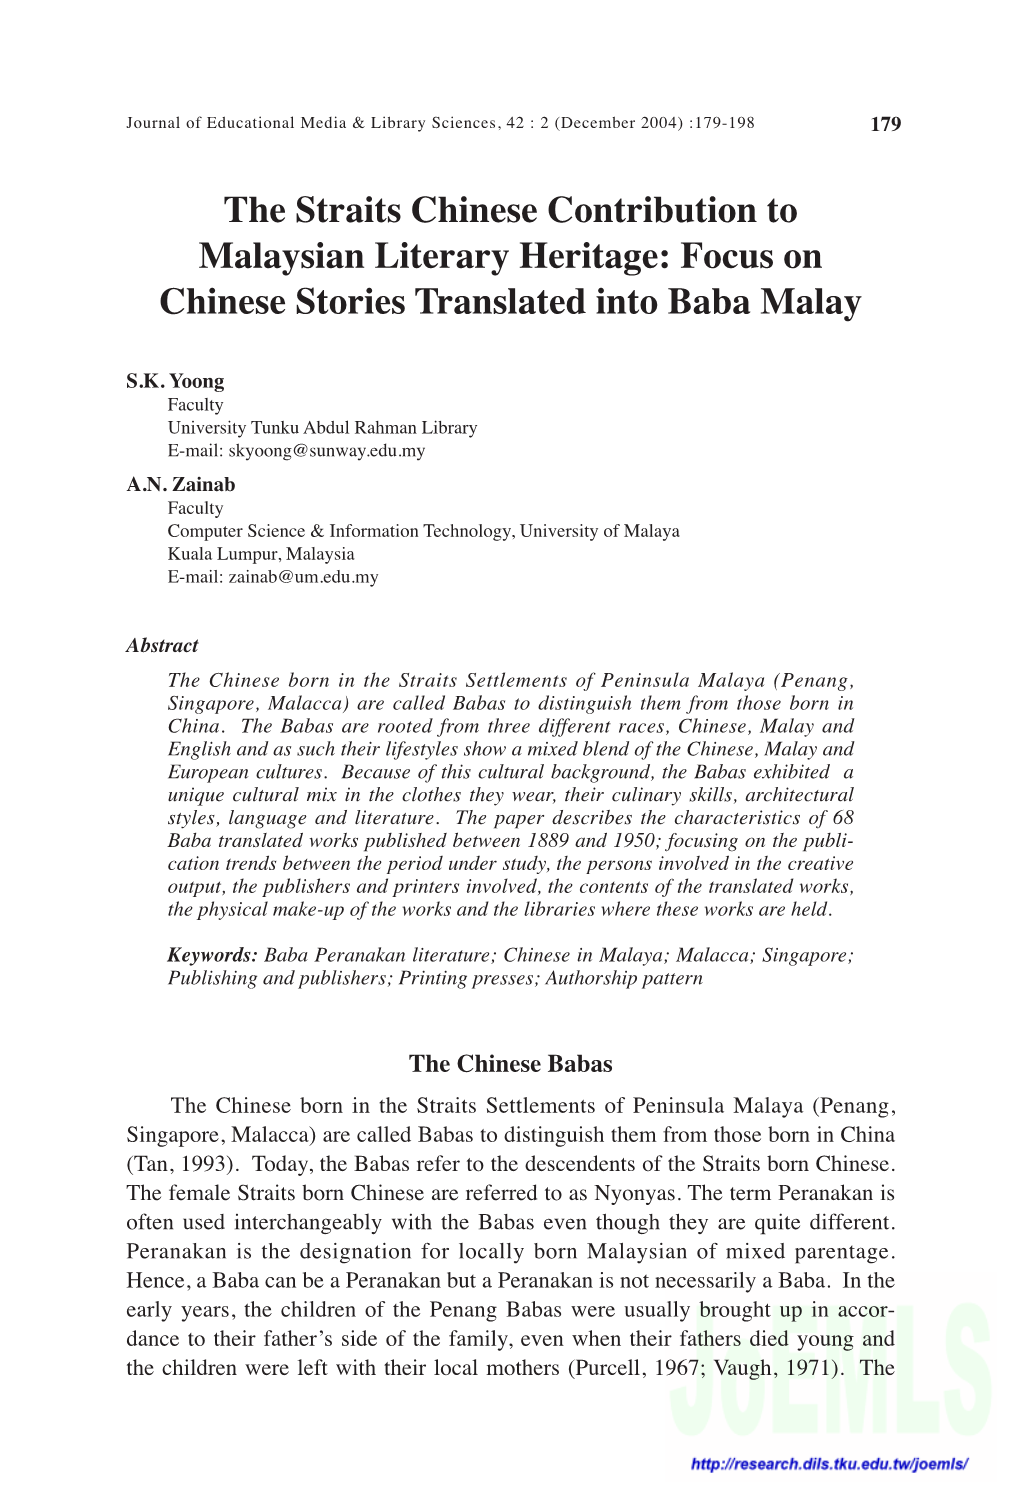 The Straits Chinese Contribution to Malaysian Literary Heritage: Focus On